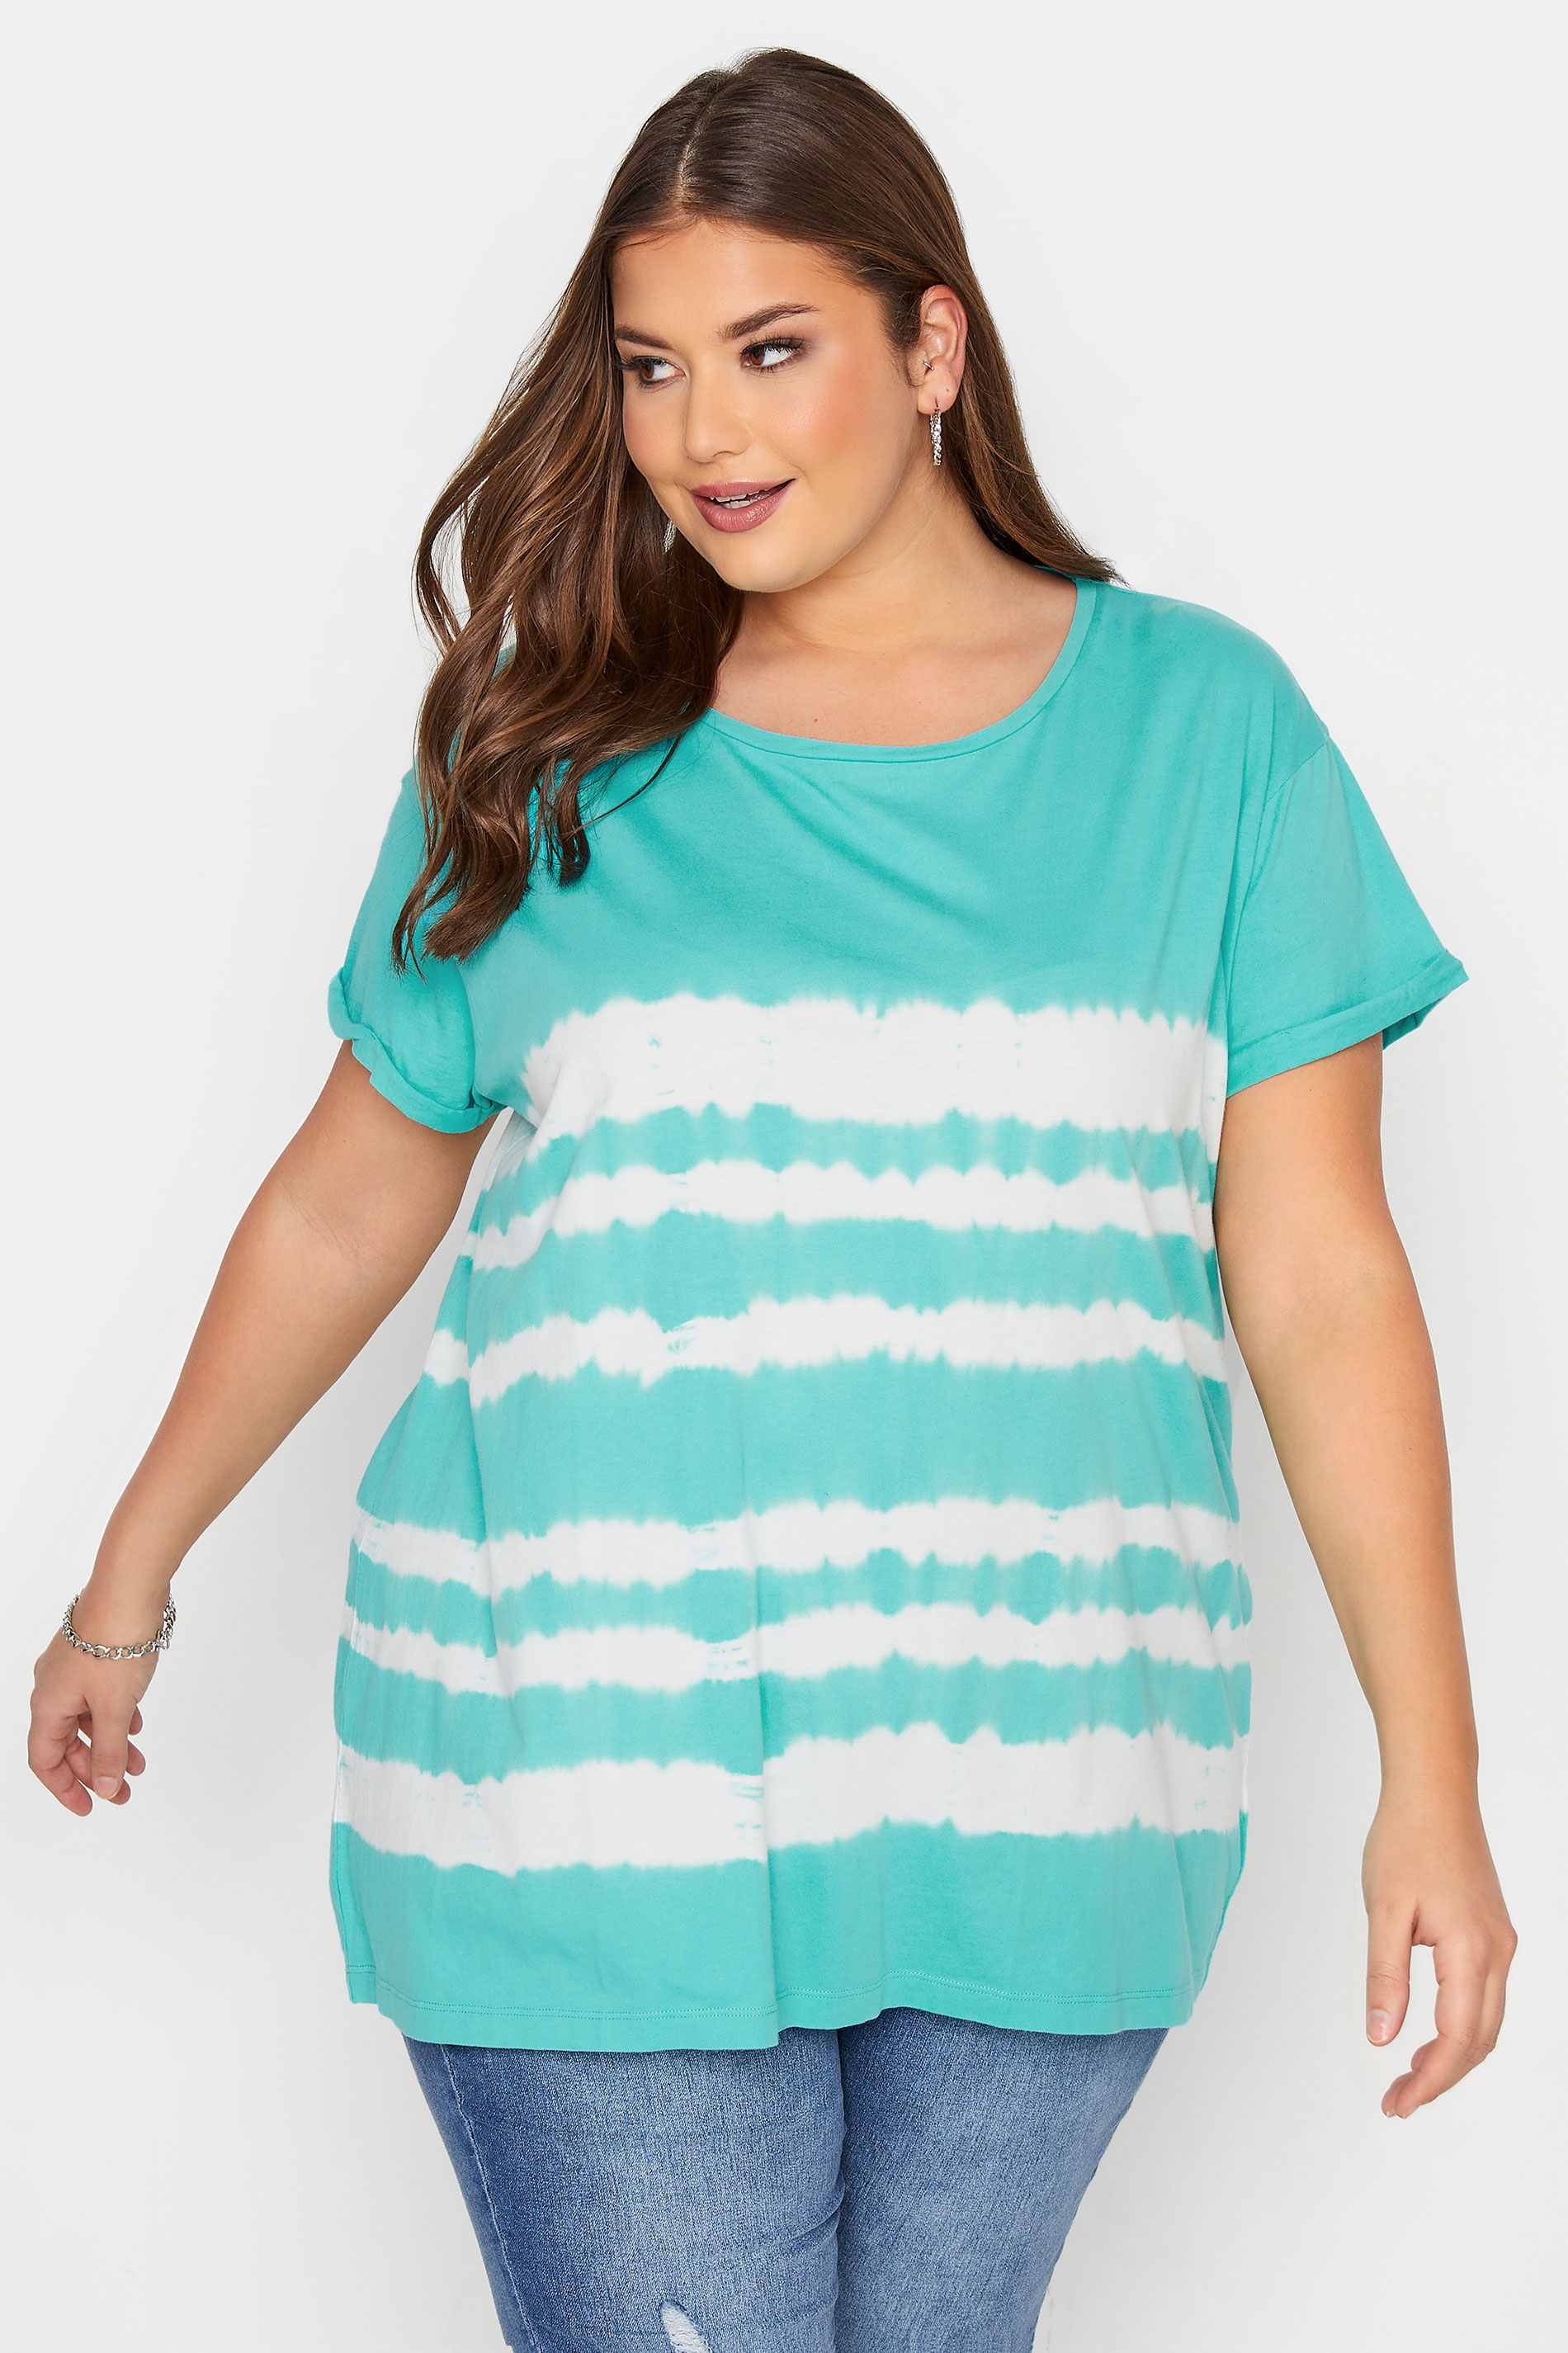 Grande taille  Tops Grande taille  Tops Jersey | YOURS FOR GOOD - T-Shirt Bleu Turquoise Manches Courtes Tie & Dye - JA35903